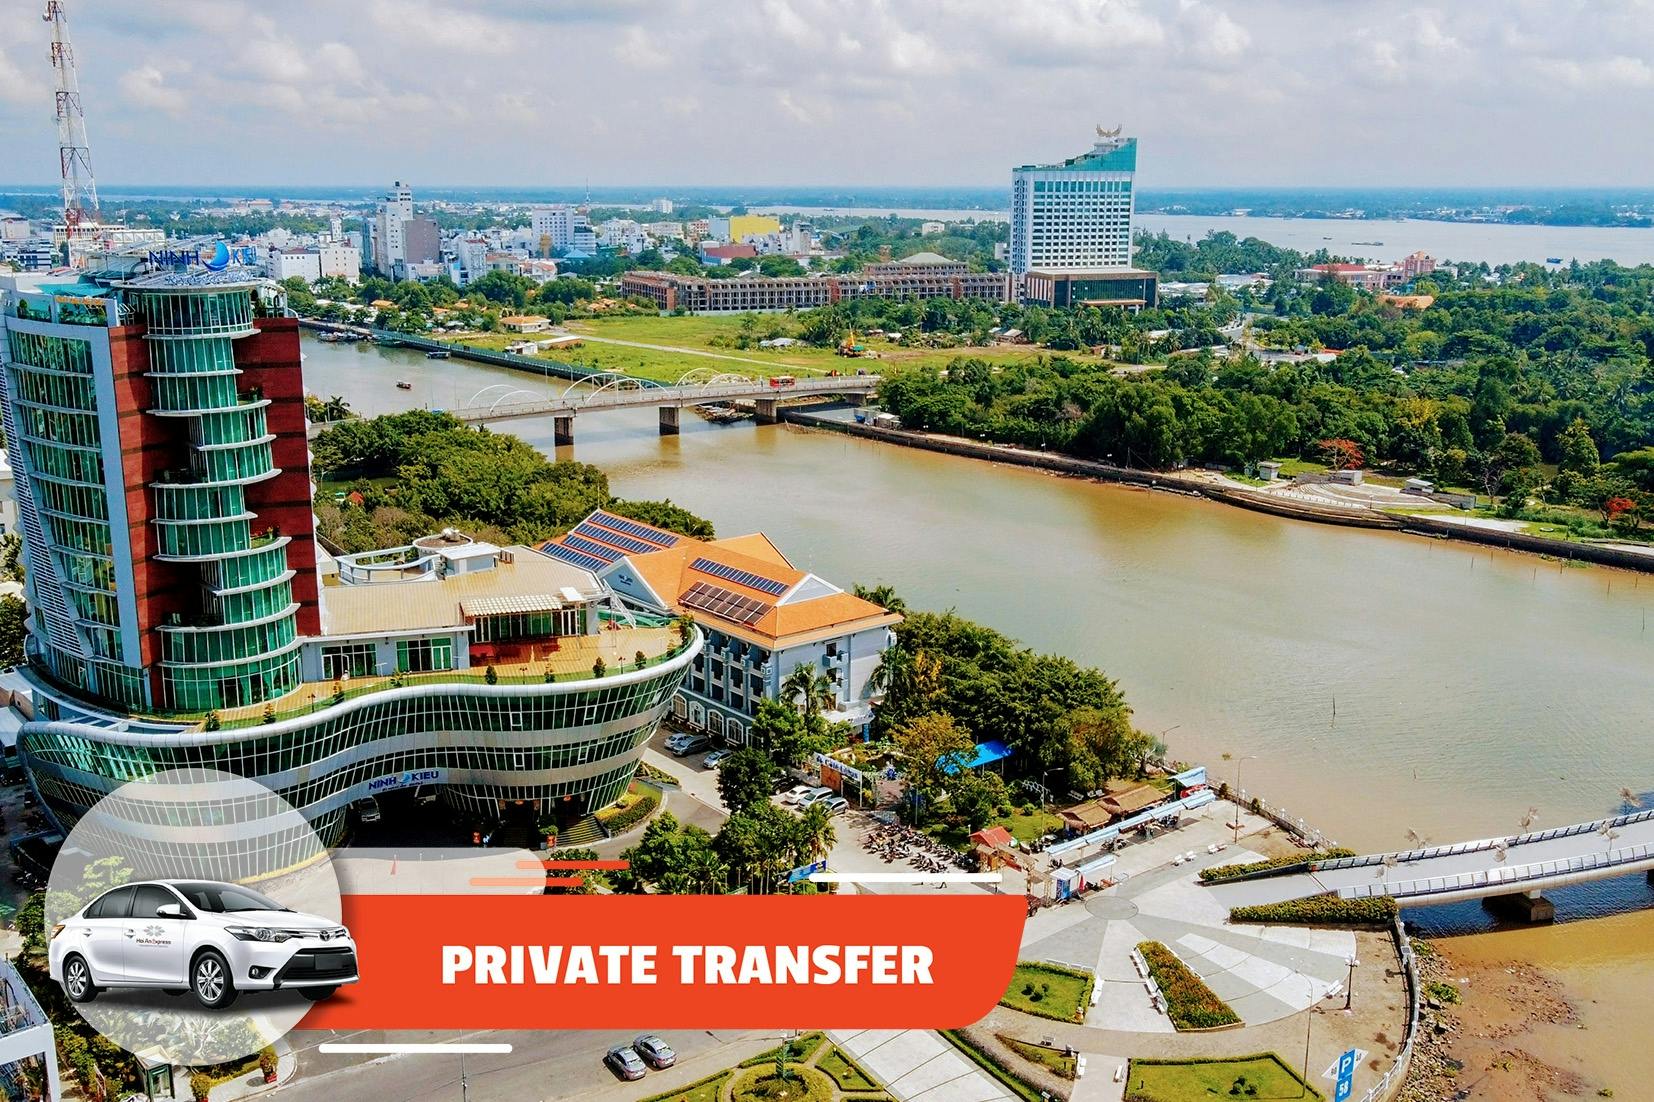 Private transfer to Ho Chi Minh City center from Can Tho